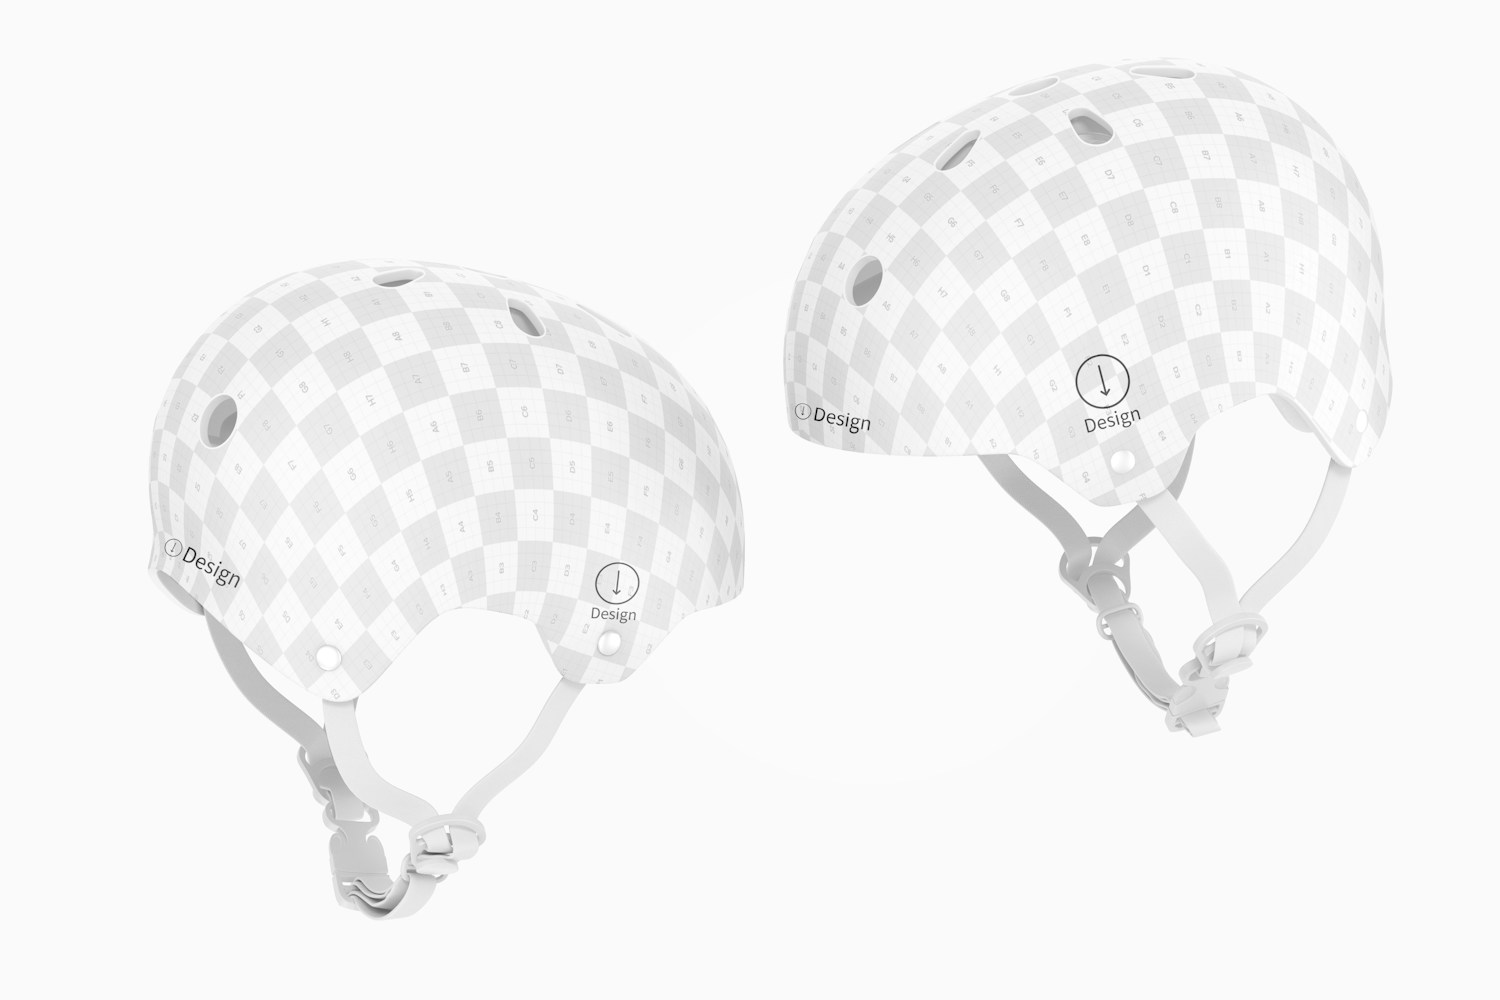 Skate Helmets Mockup, Left and Right View